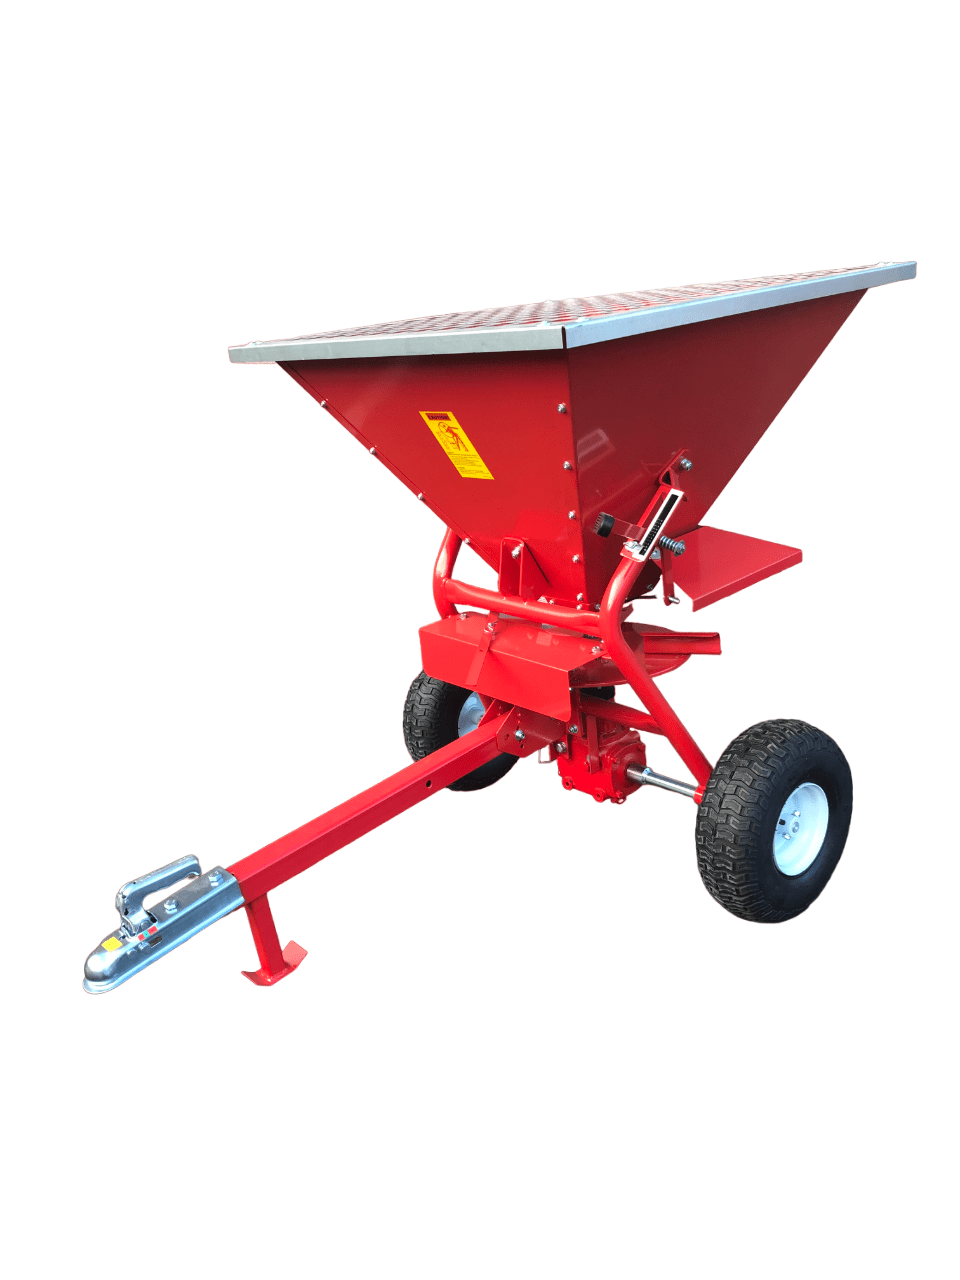 Invicta Forks & Attachments Limited IMG-4 - S/COVER Galvanised Hopper Grid for Mini Towable Salt Spreader